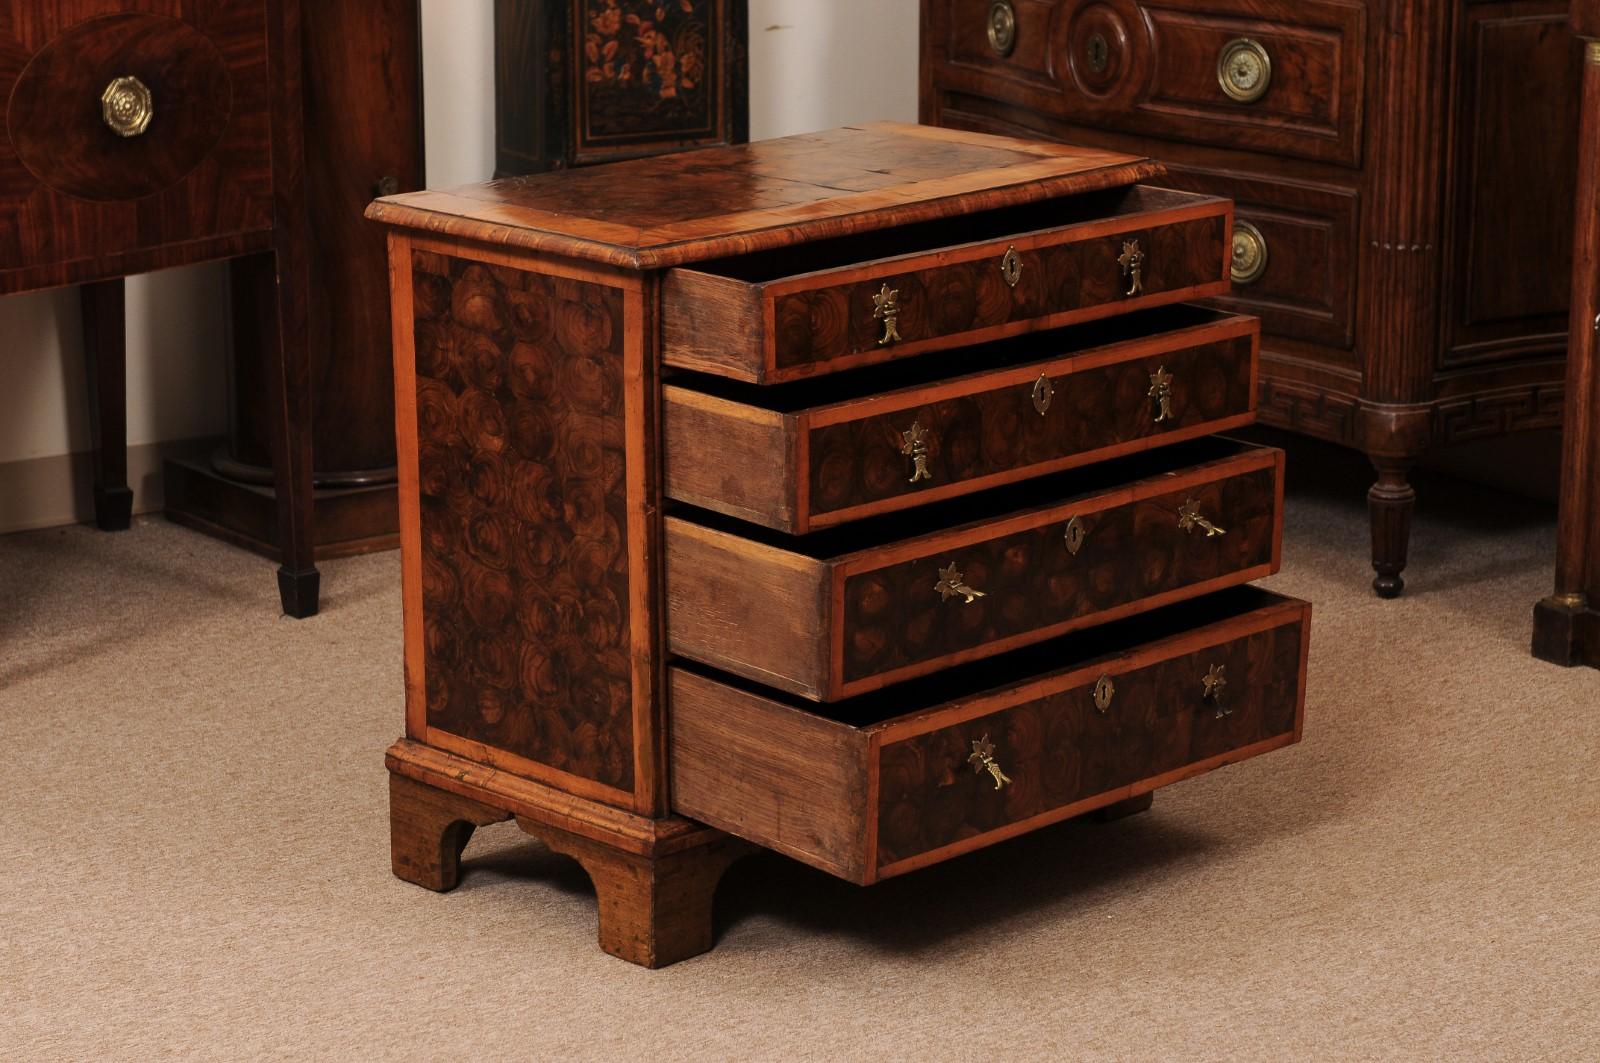 18th Century English Oyster Veneered Walnut Bachelor’s Chest   In Fair Condition For Sale In Atlanta, GA